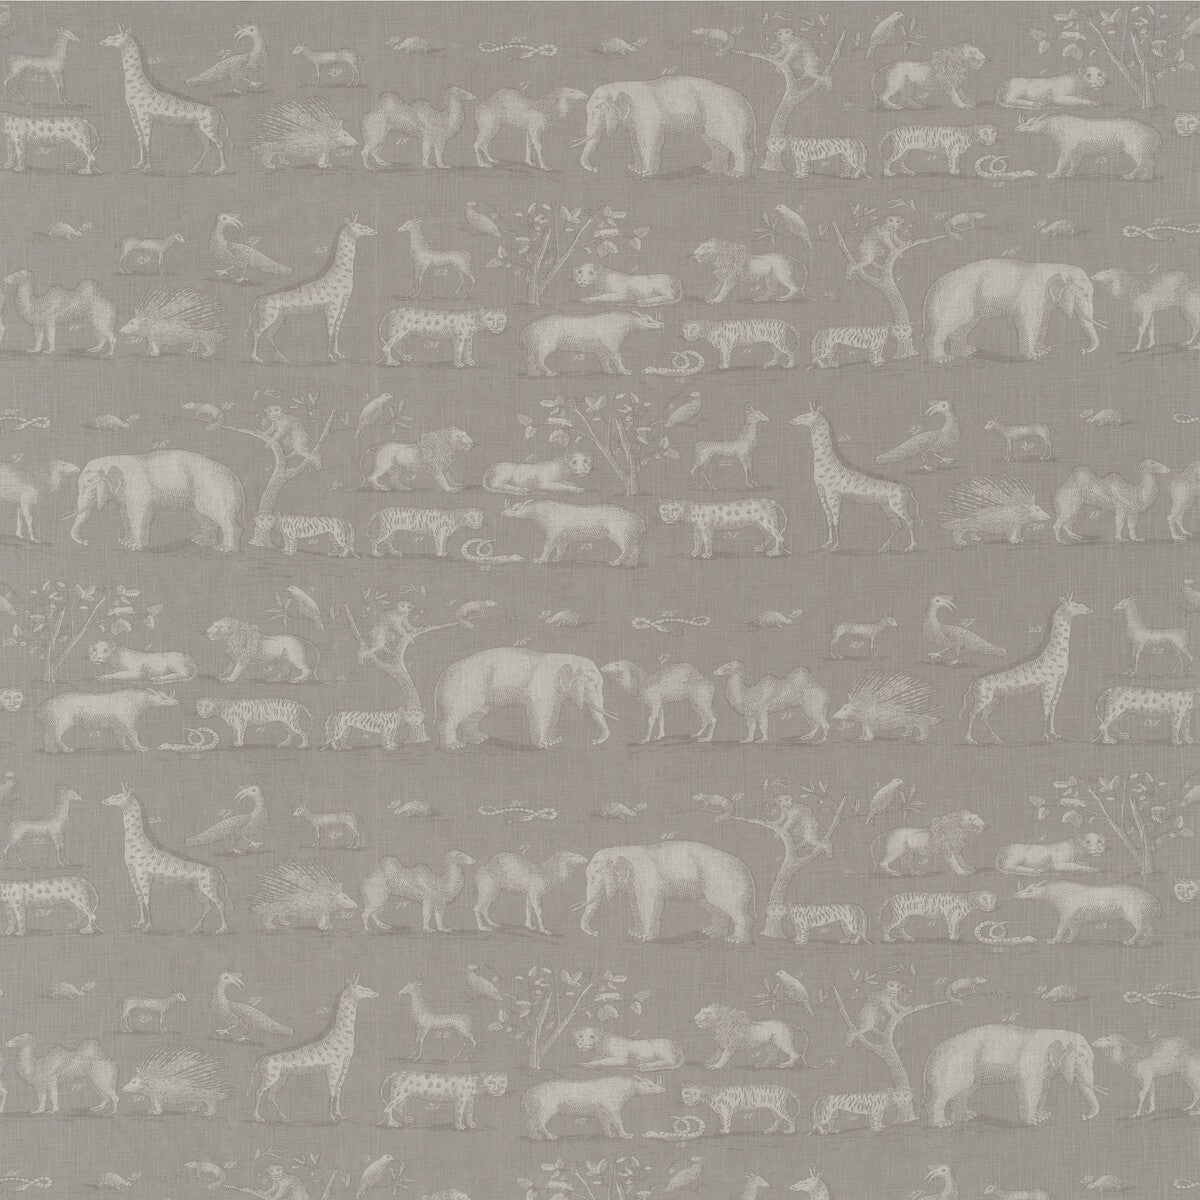 Kingdom fabric in canvas color - pattern AM100291.106.0 - by Kravet Couture in the Andrew Martin Expedition collection